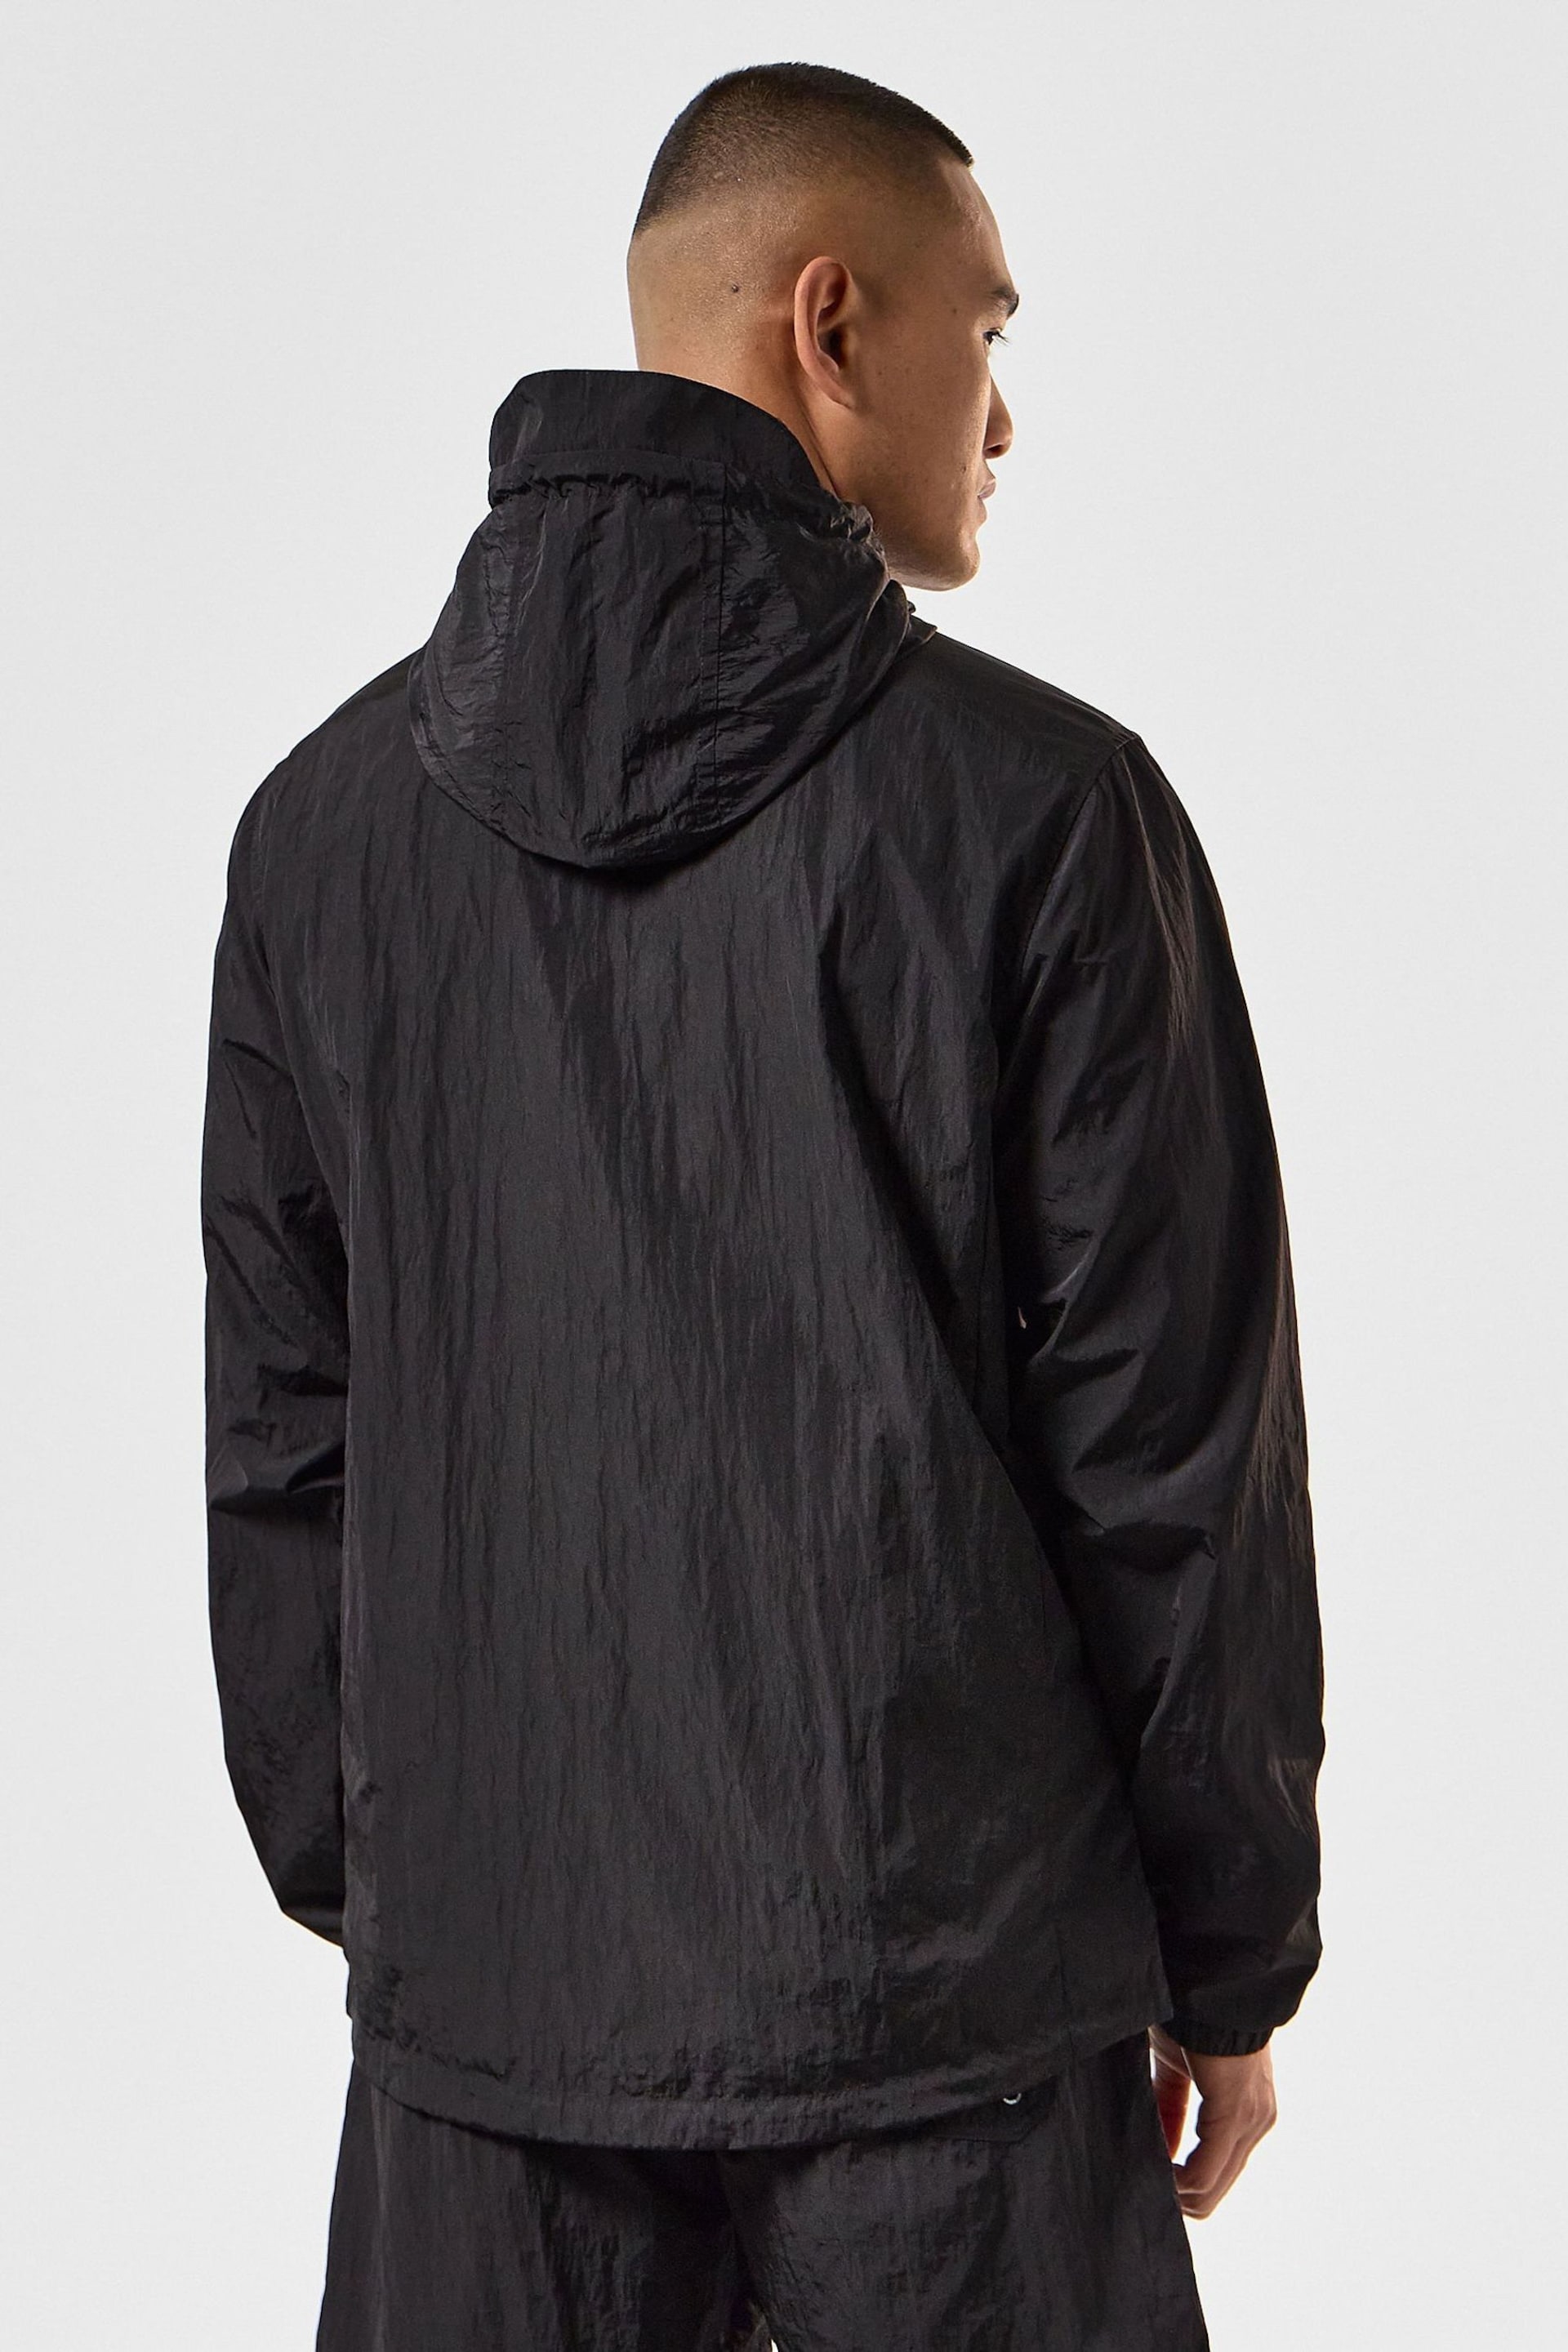 Weekend Offender Mens Black Classic Technician Jacket - Image 2 of 4